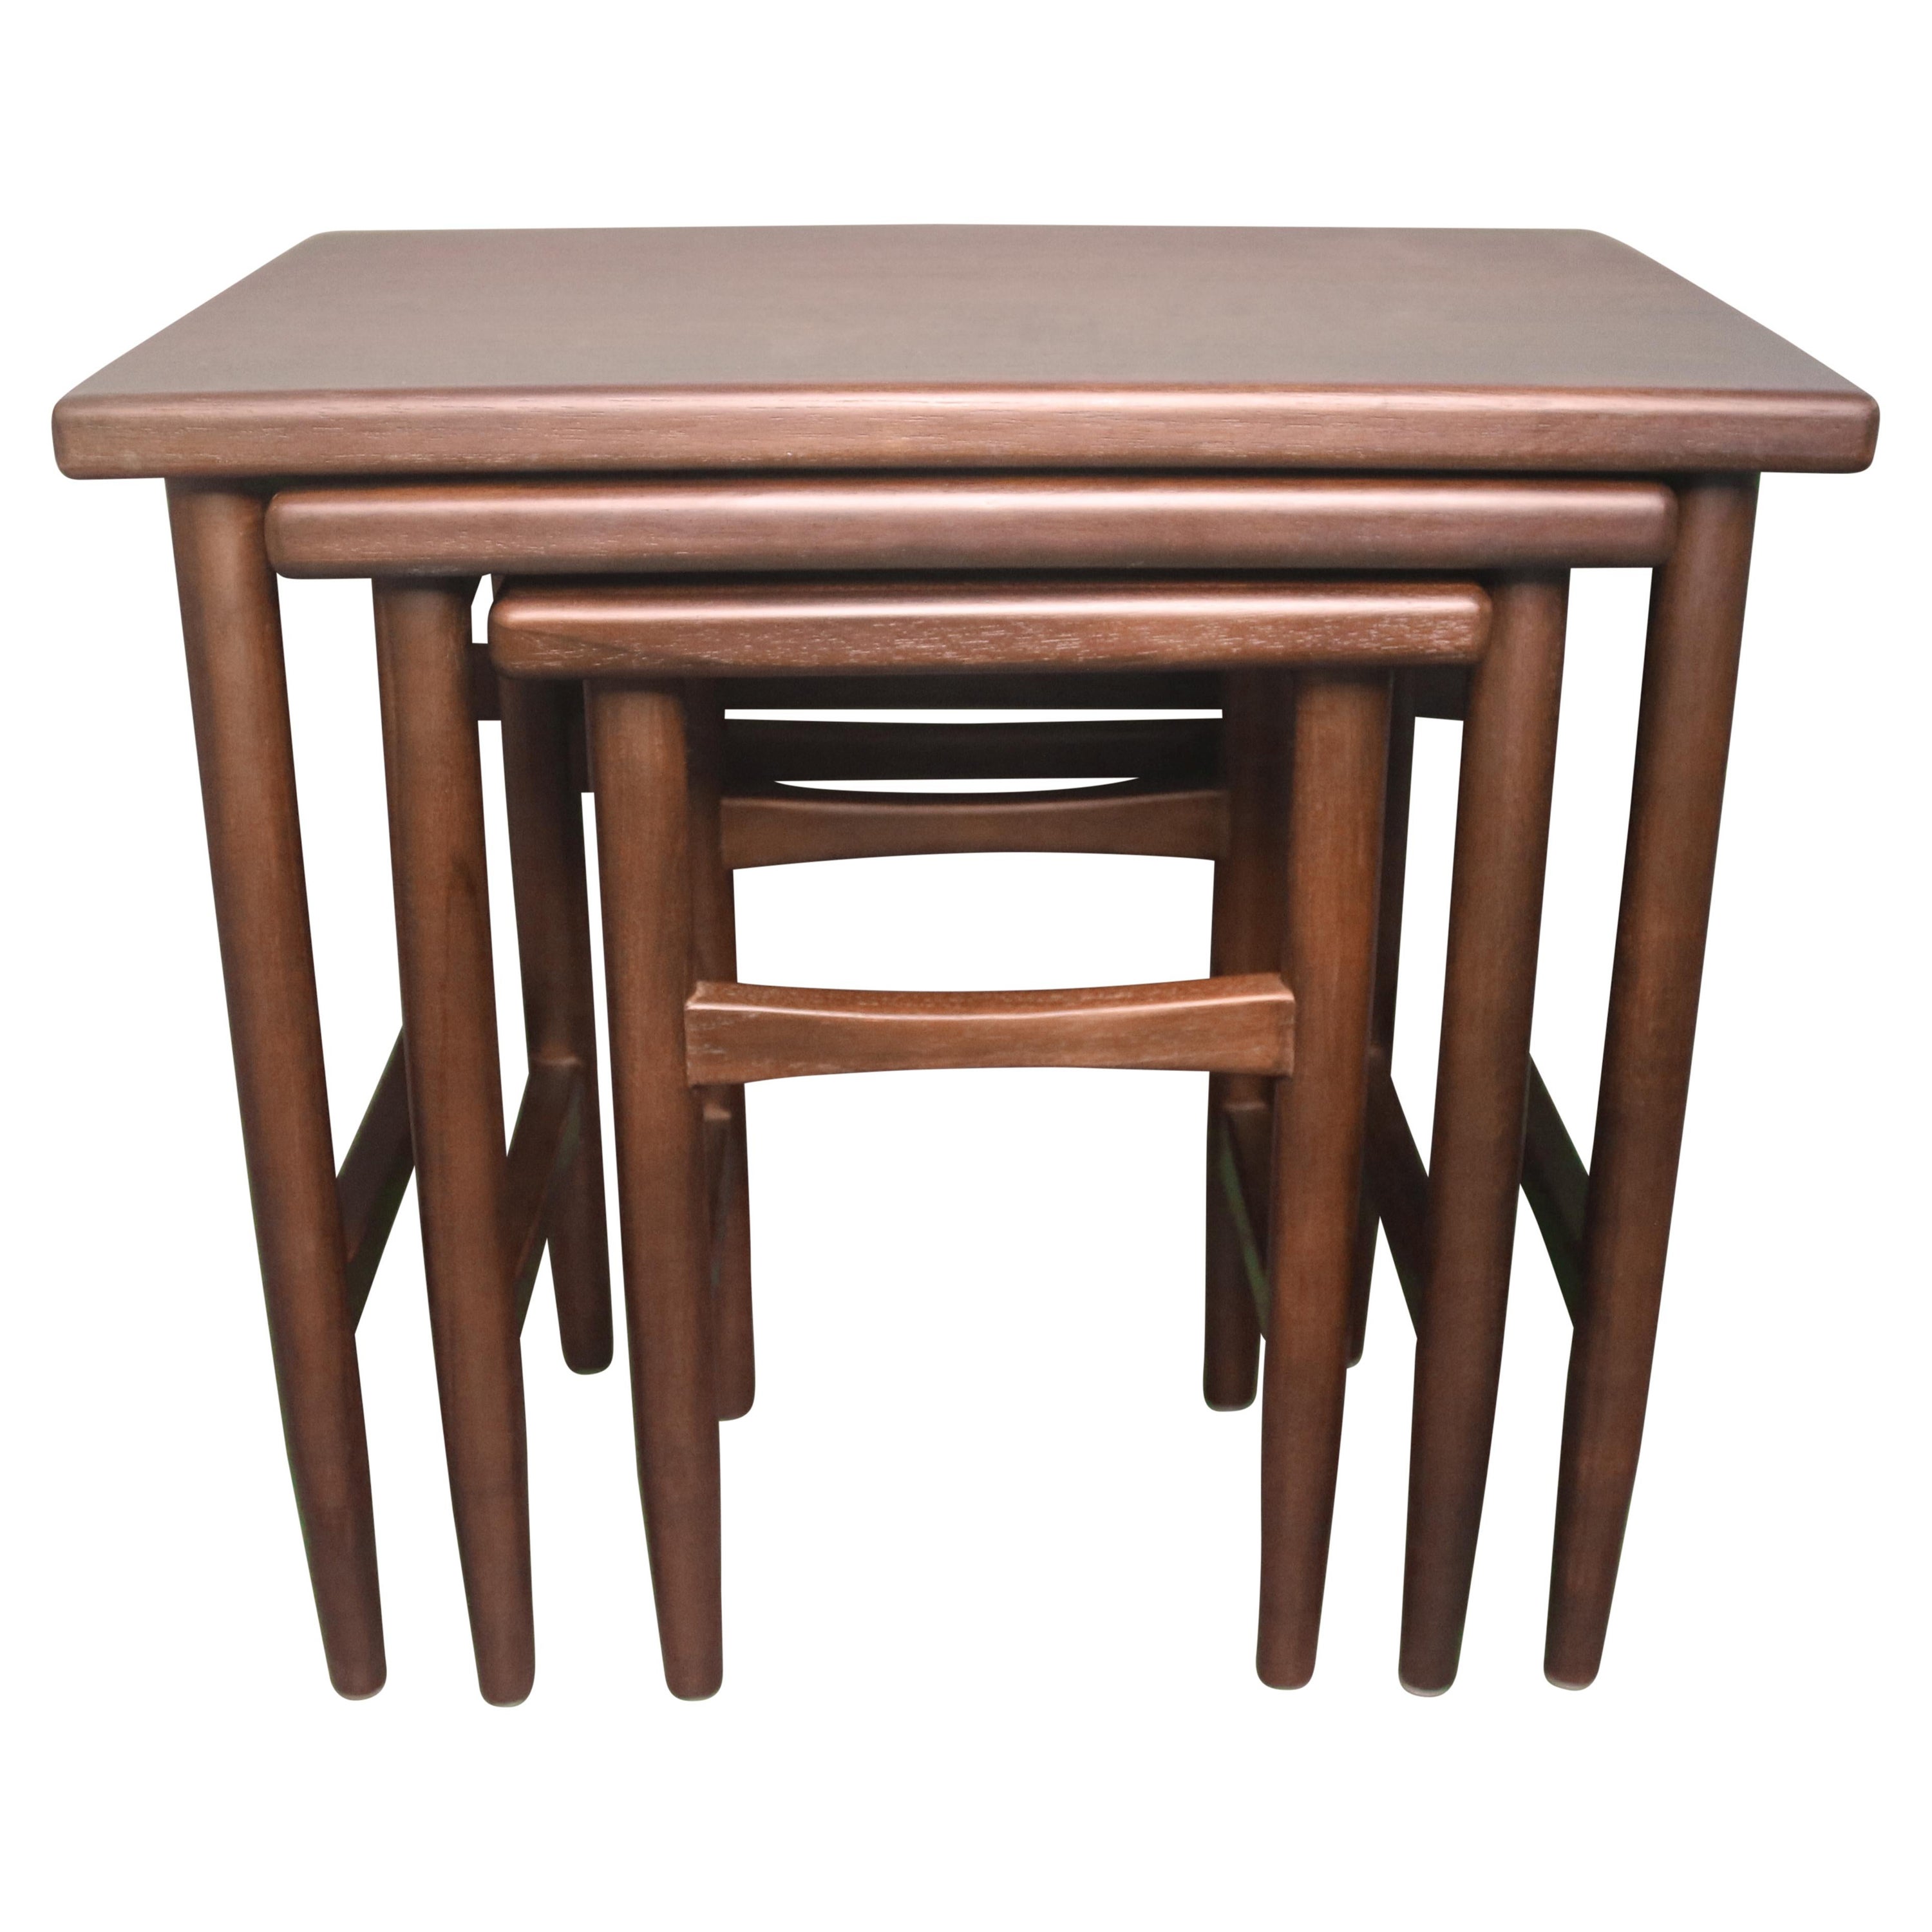 Russian Doll Nesting Tables in Walnut Brown For Sale